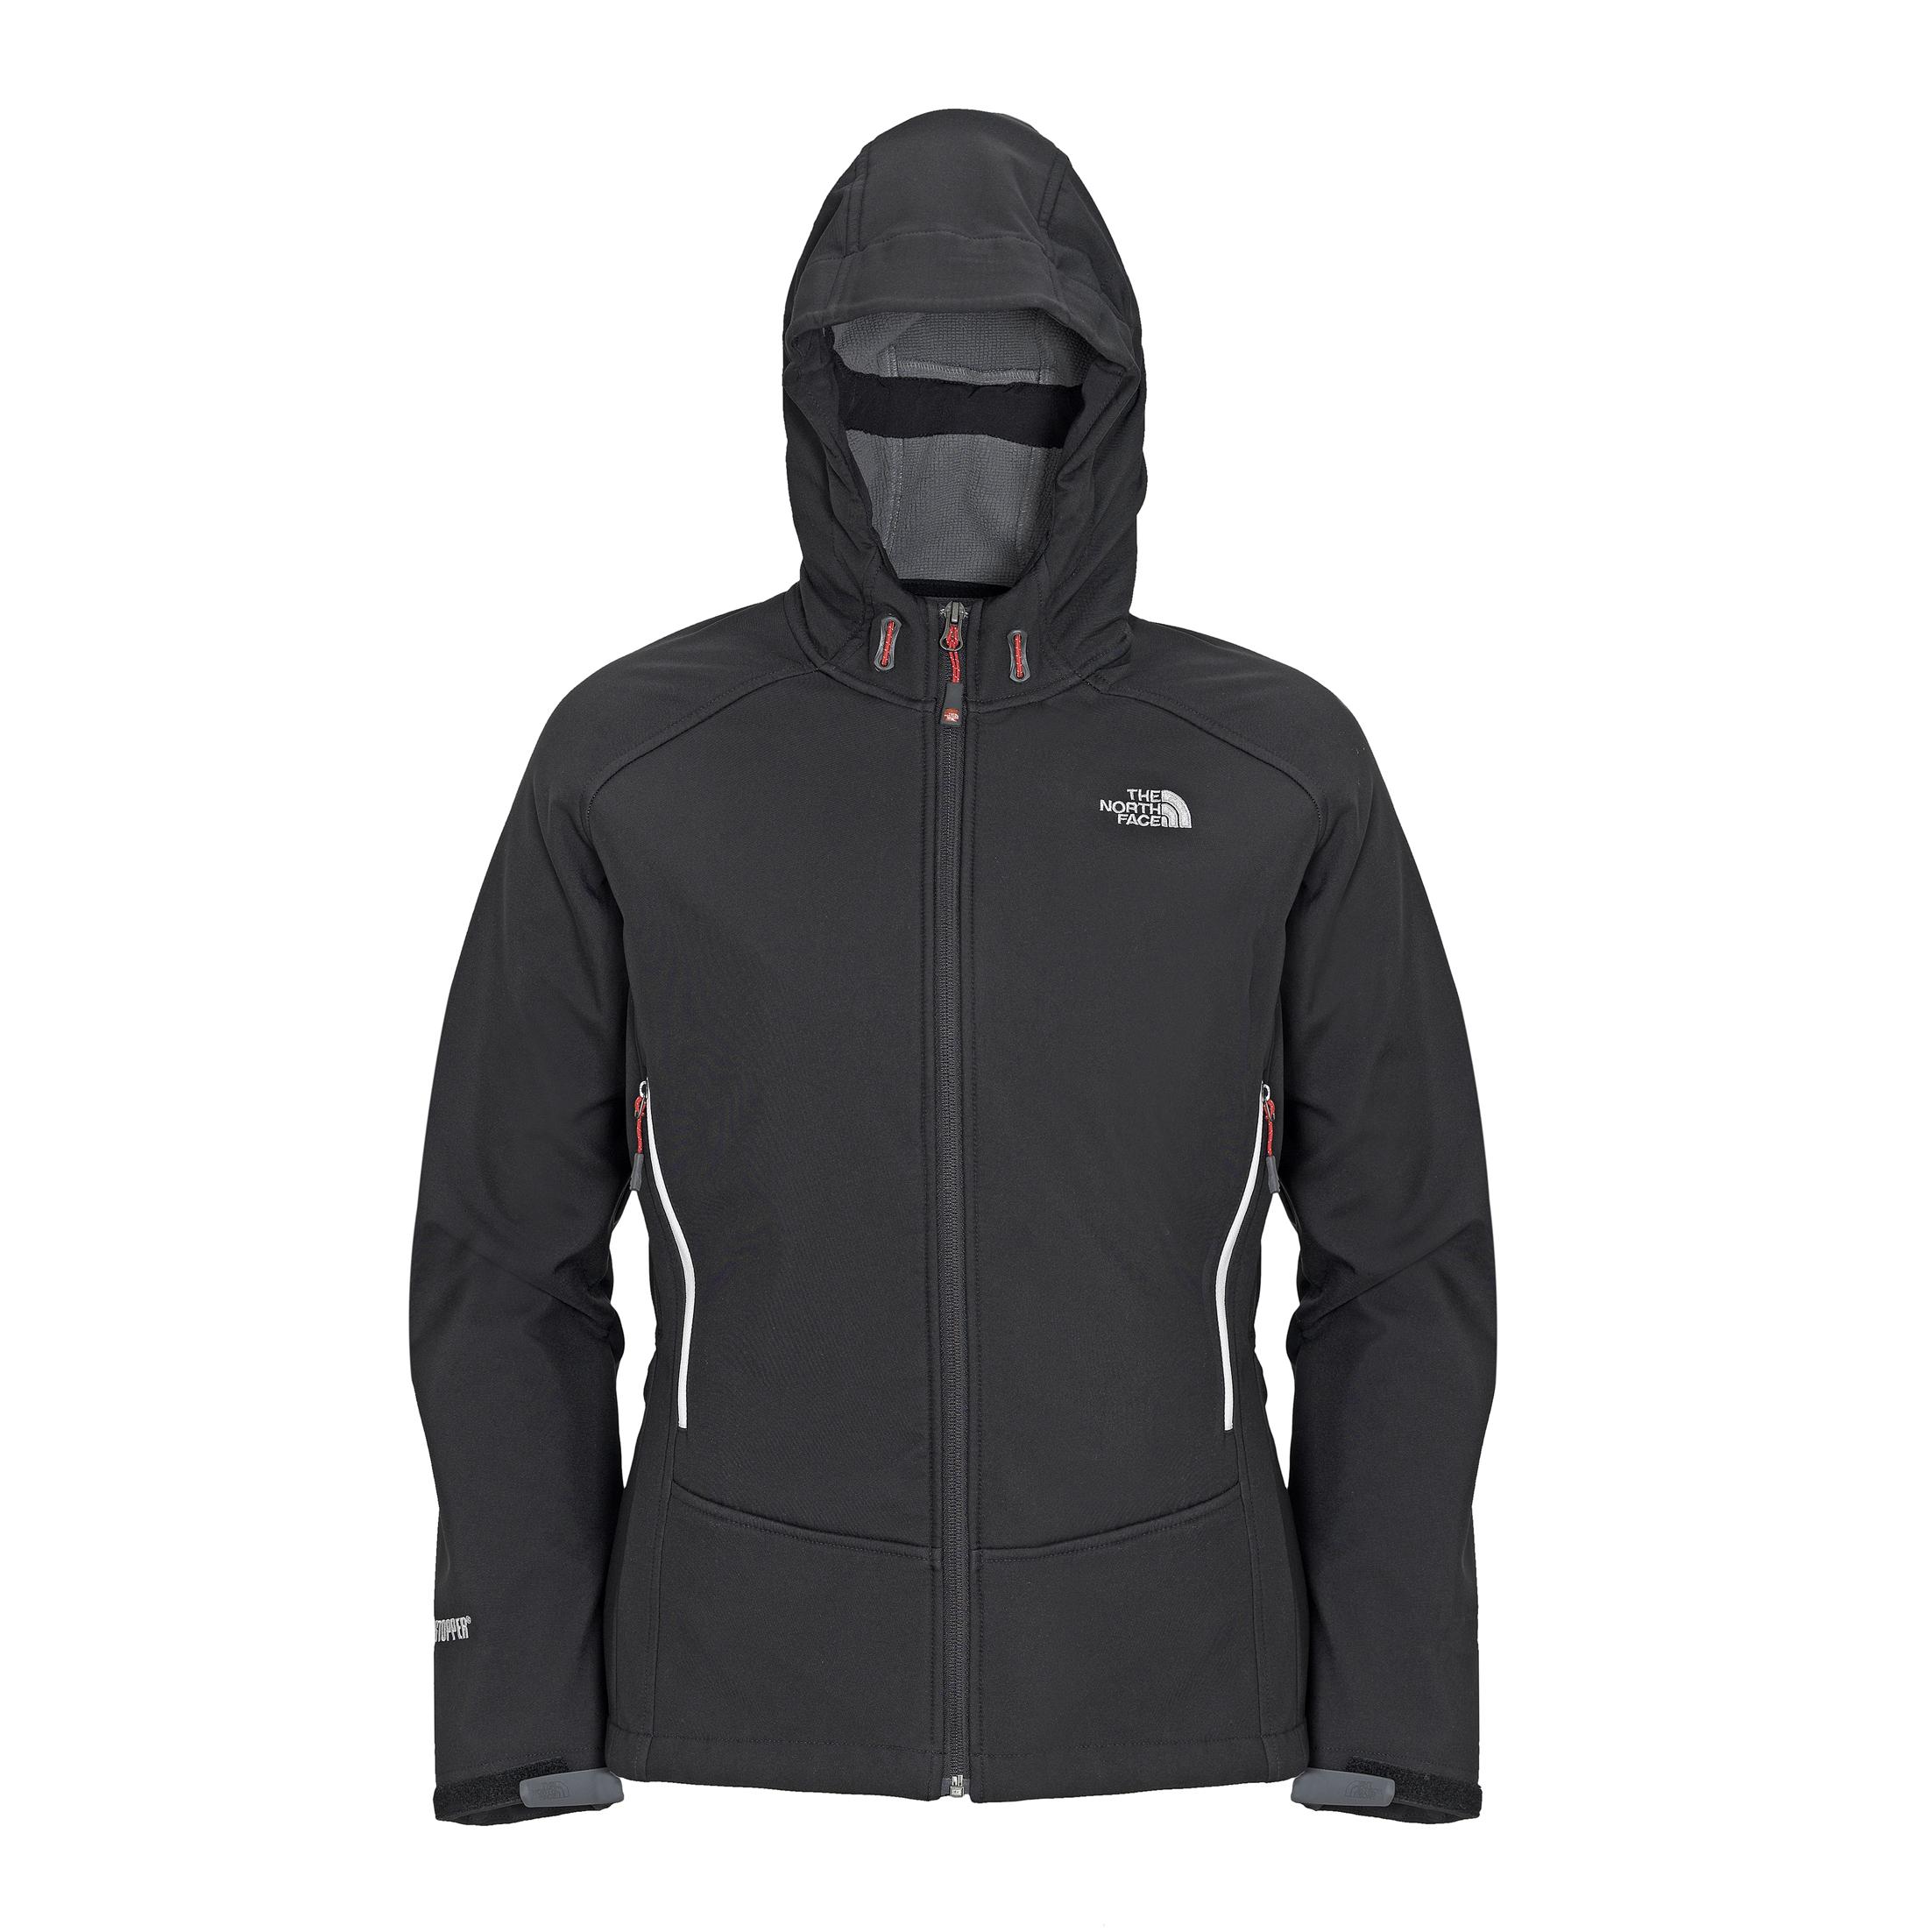 Foto The north face W valkyrie jacket foto 213834